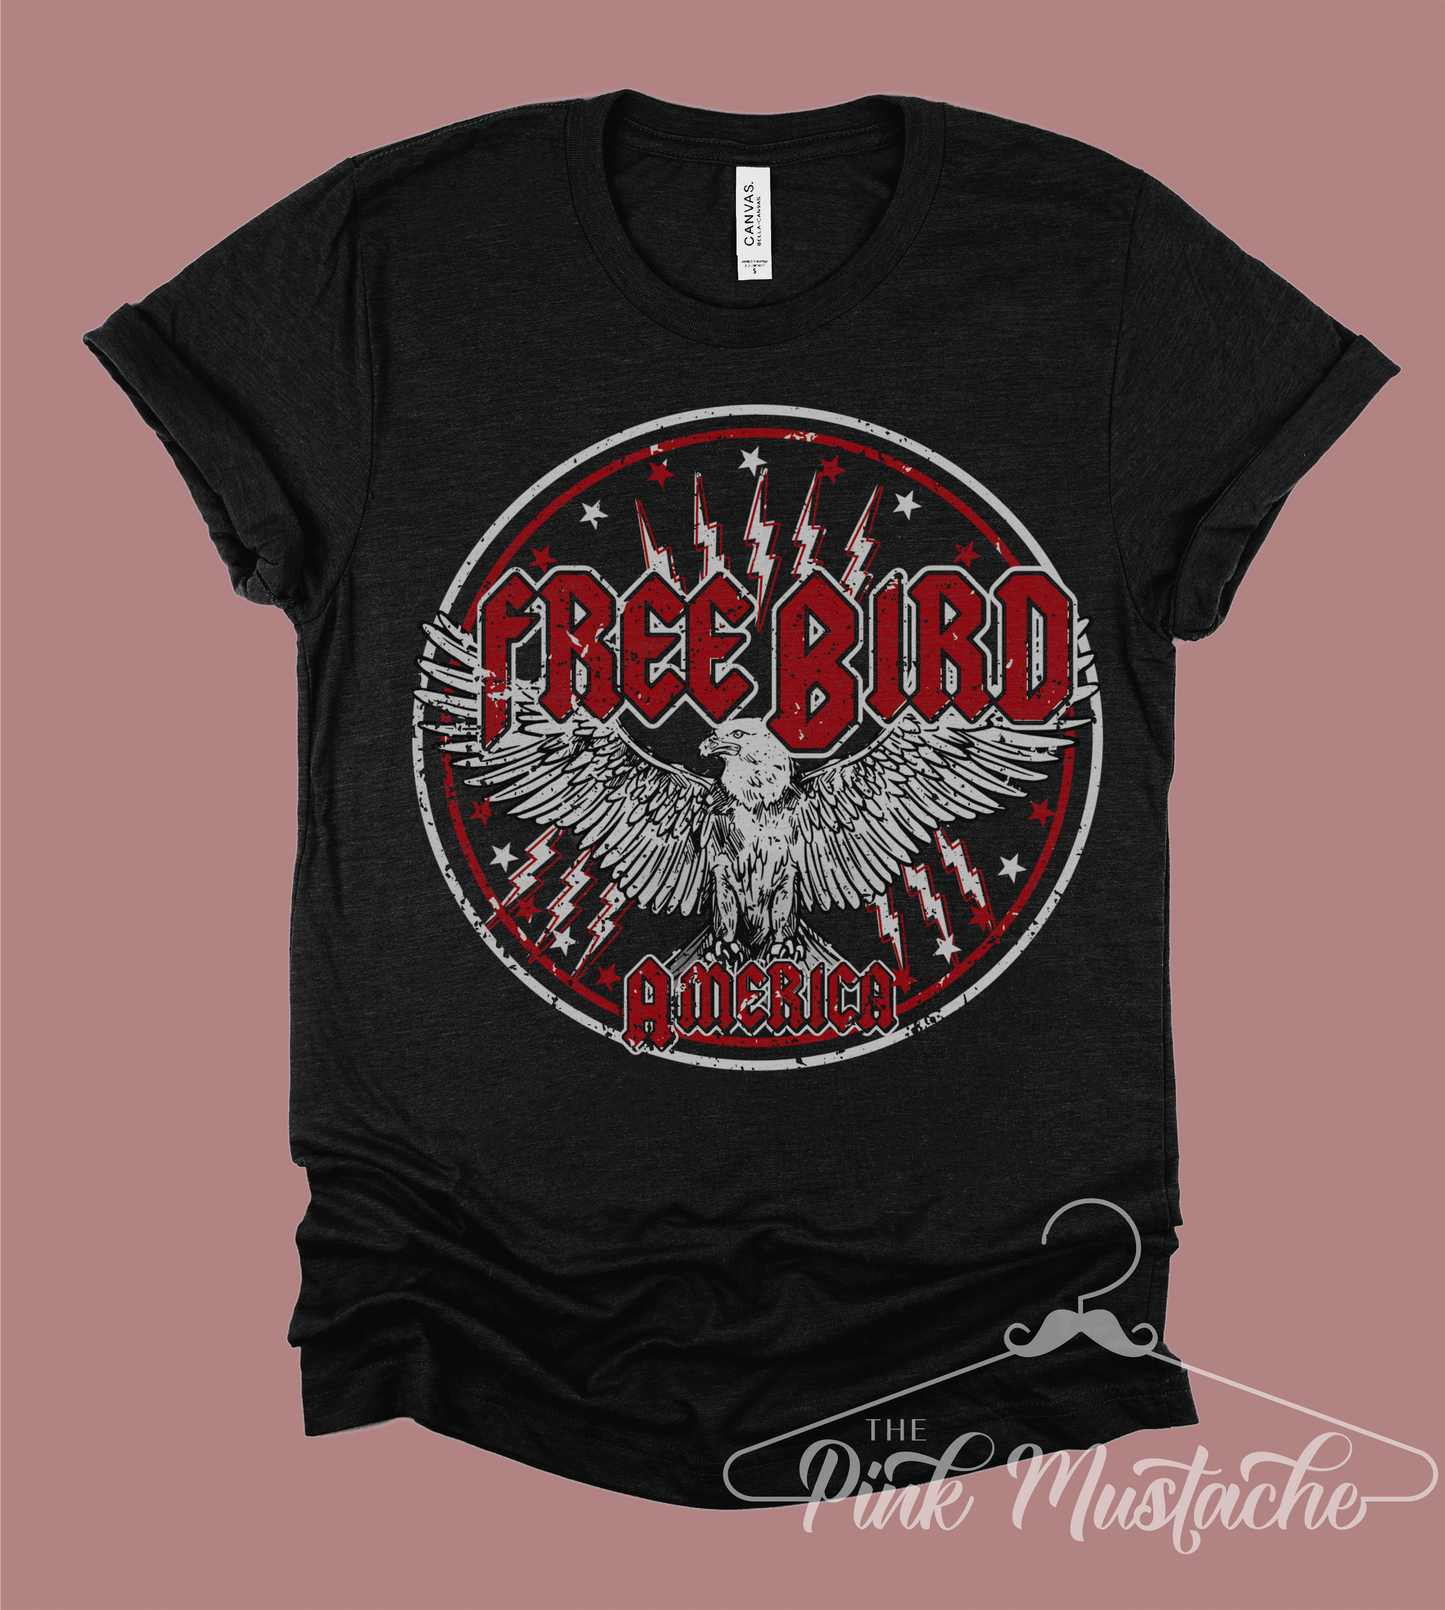 Free Bird America Be Free Rocker Rock N Roll Tee / Bella Canvas Shirts / Rocker Tees/ Rocker Tee/ Youth and Adult Sizes Available